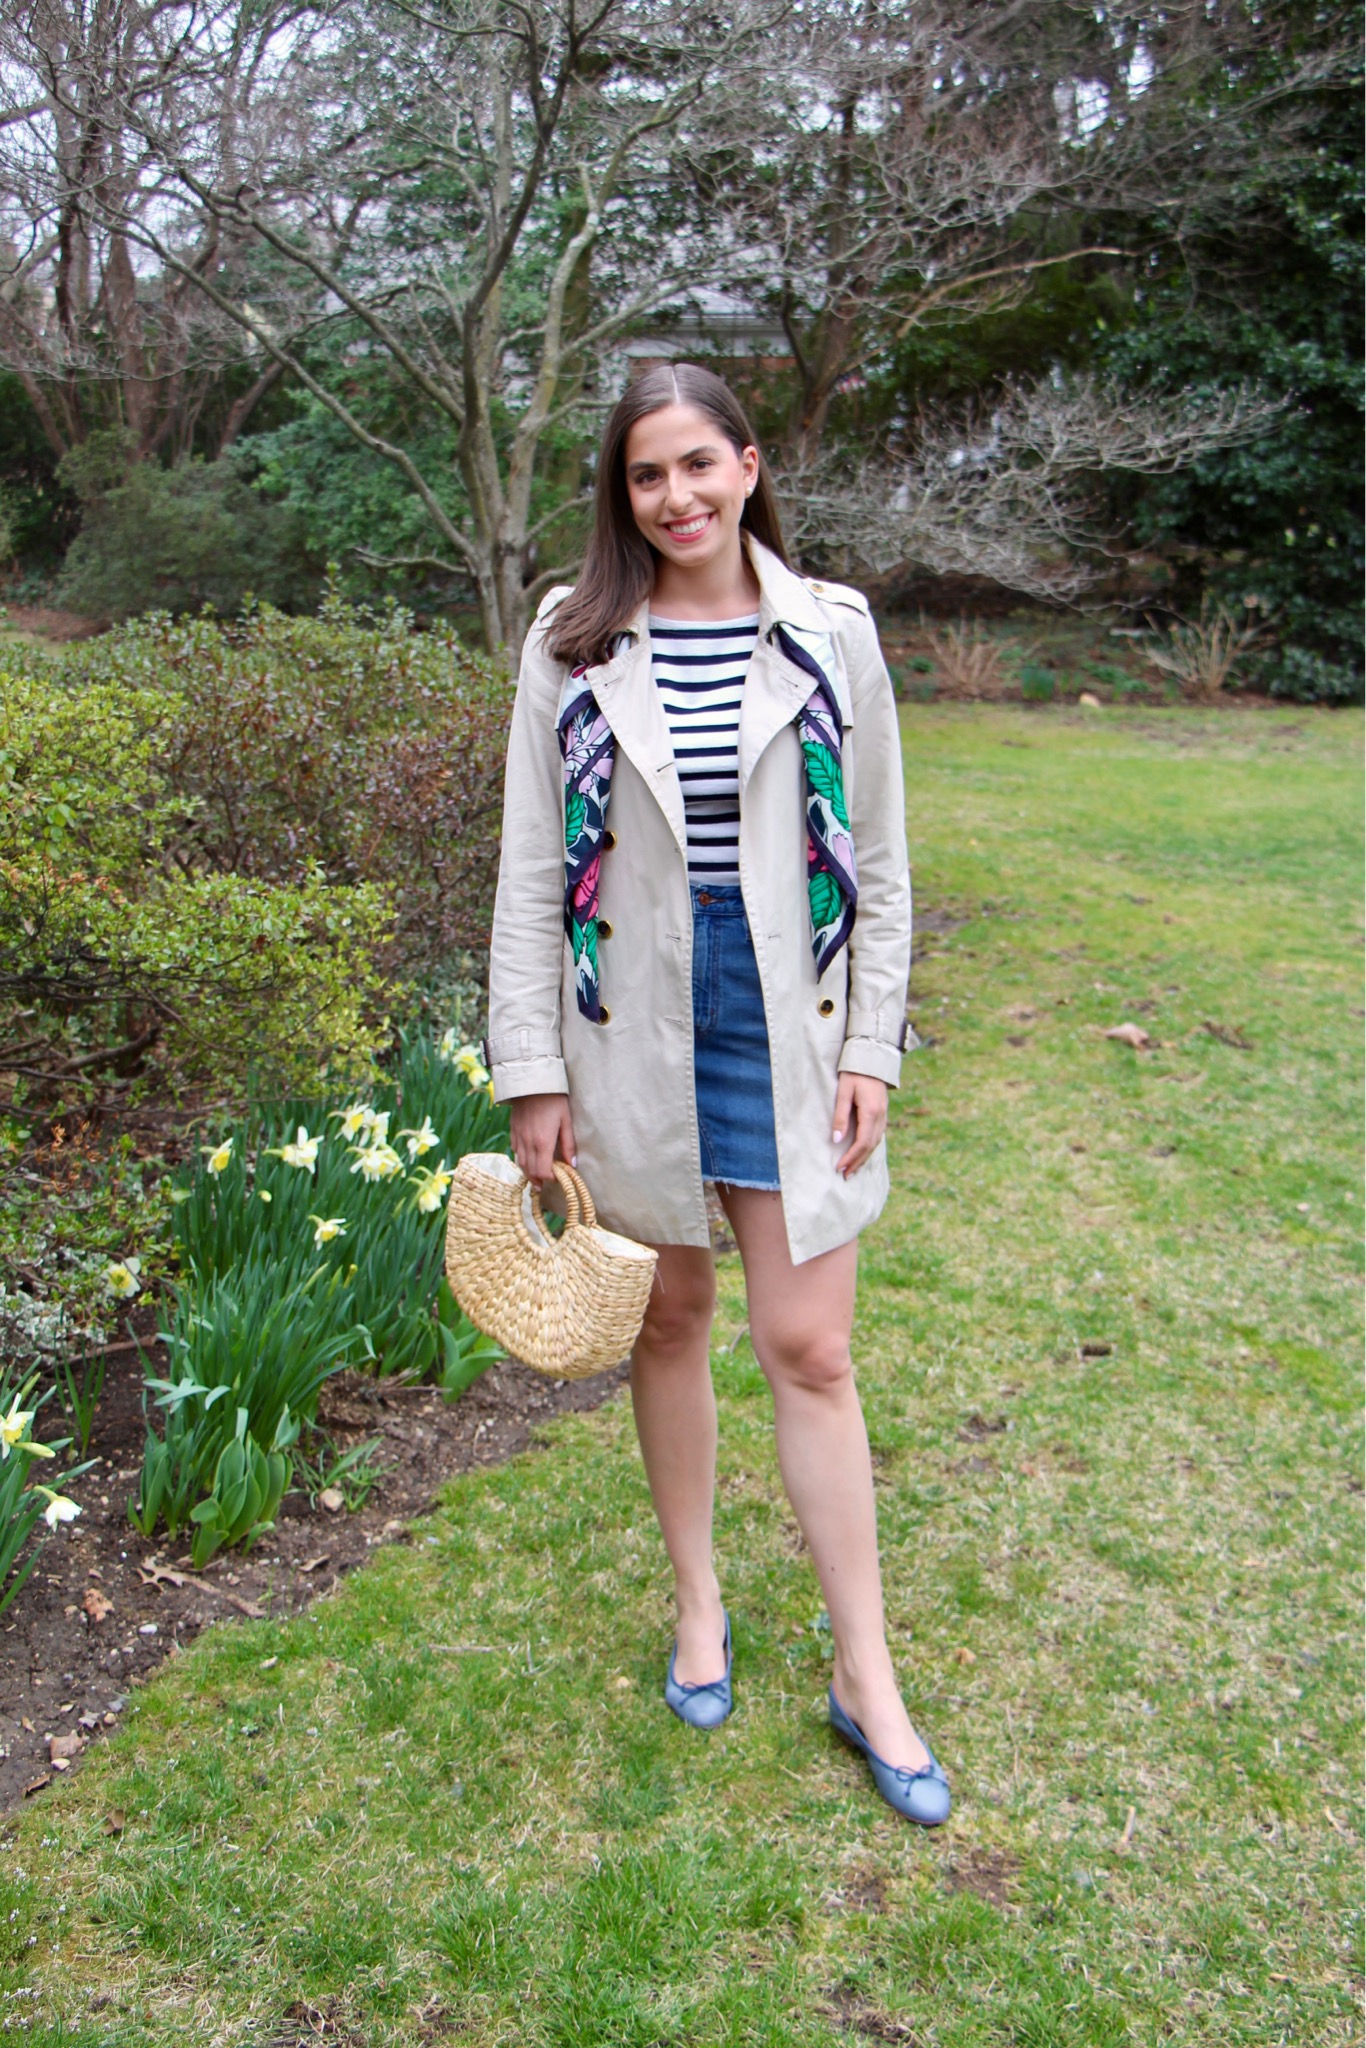 spring outfit, denim skirt, jean skirt, trench coat, straw bag, striped top, silk scarf, straw bag, classic outfit, preppy outfit